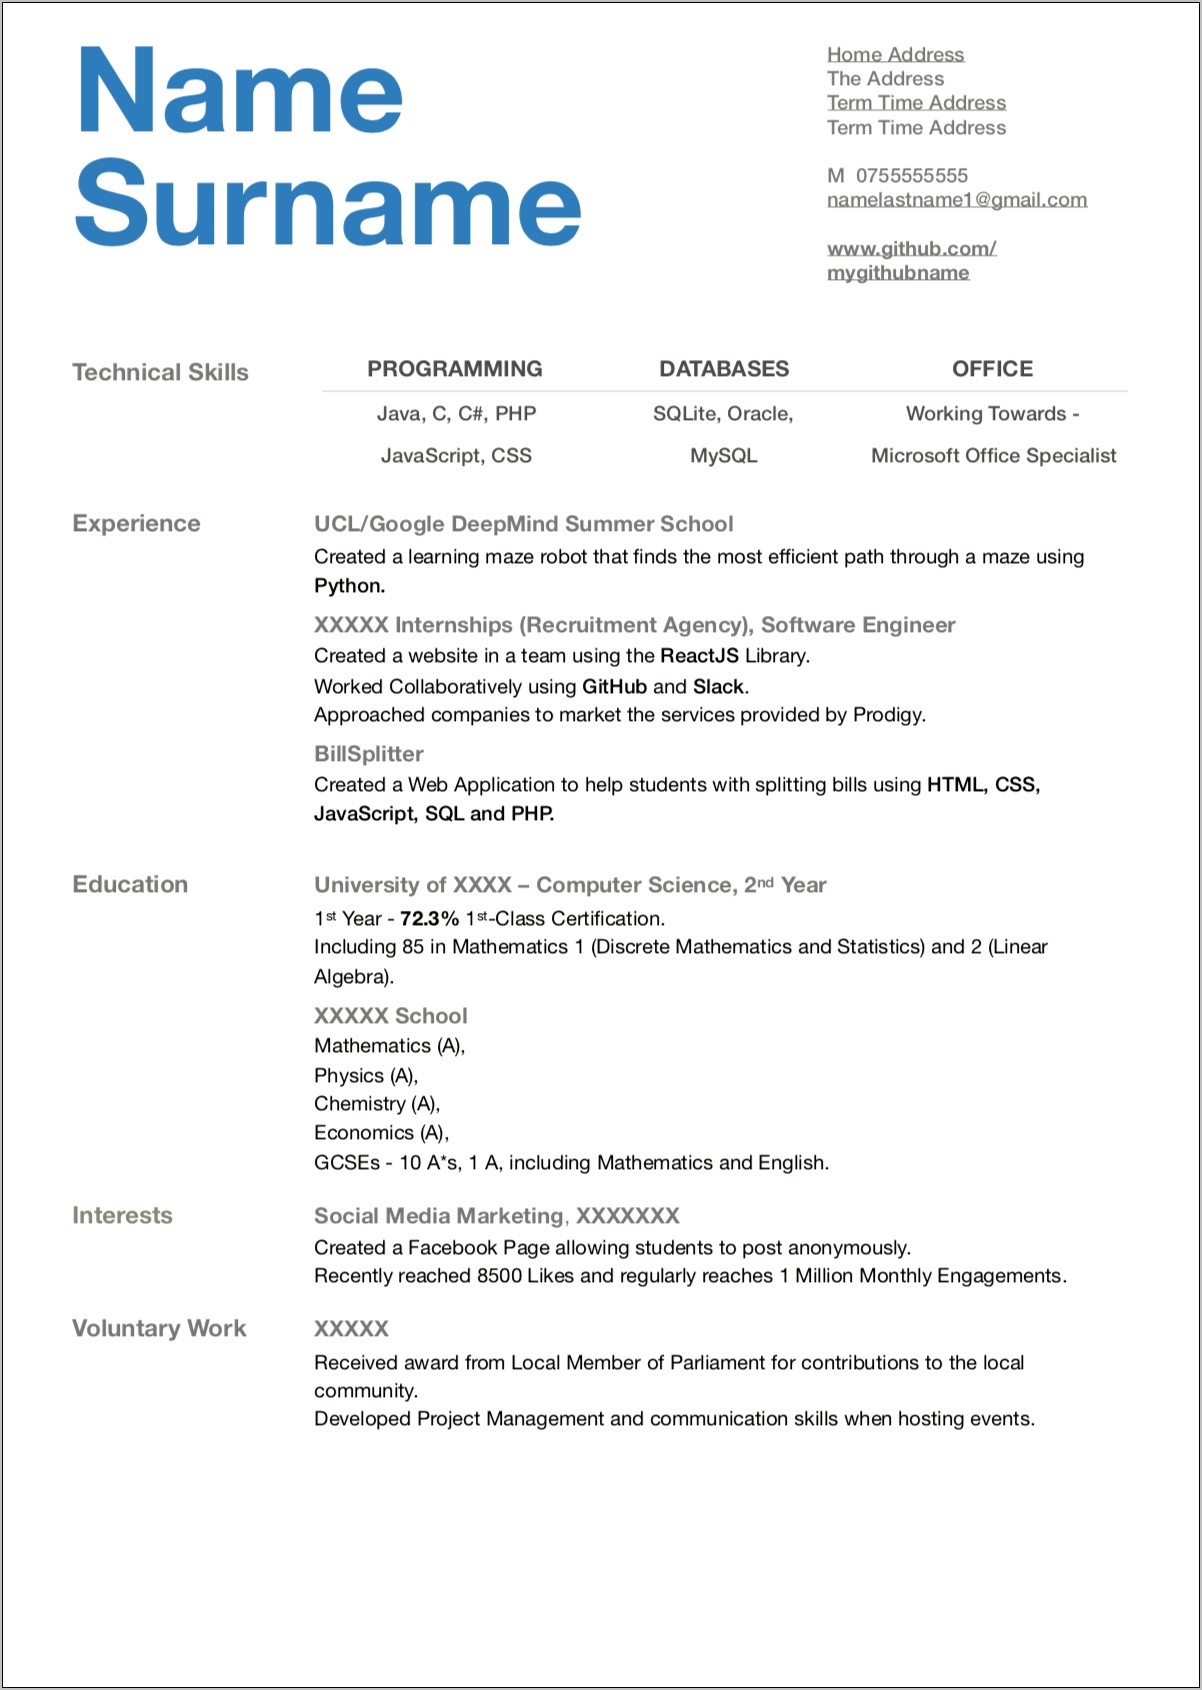 Resume Objective For Computer Science Internship